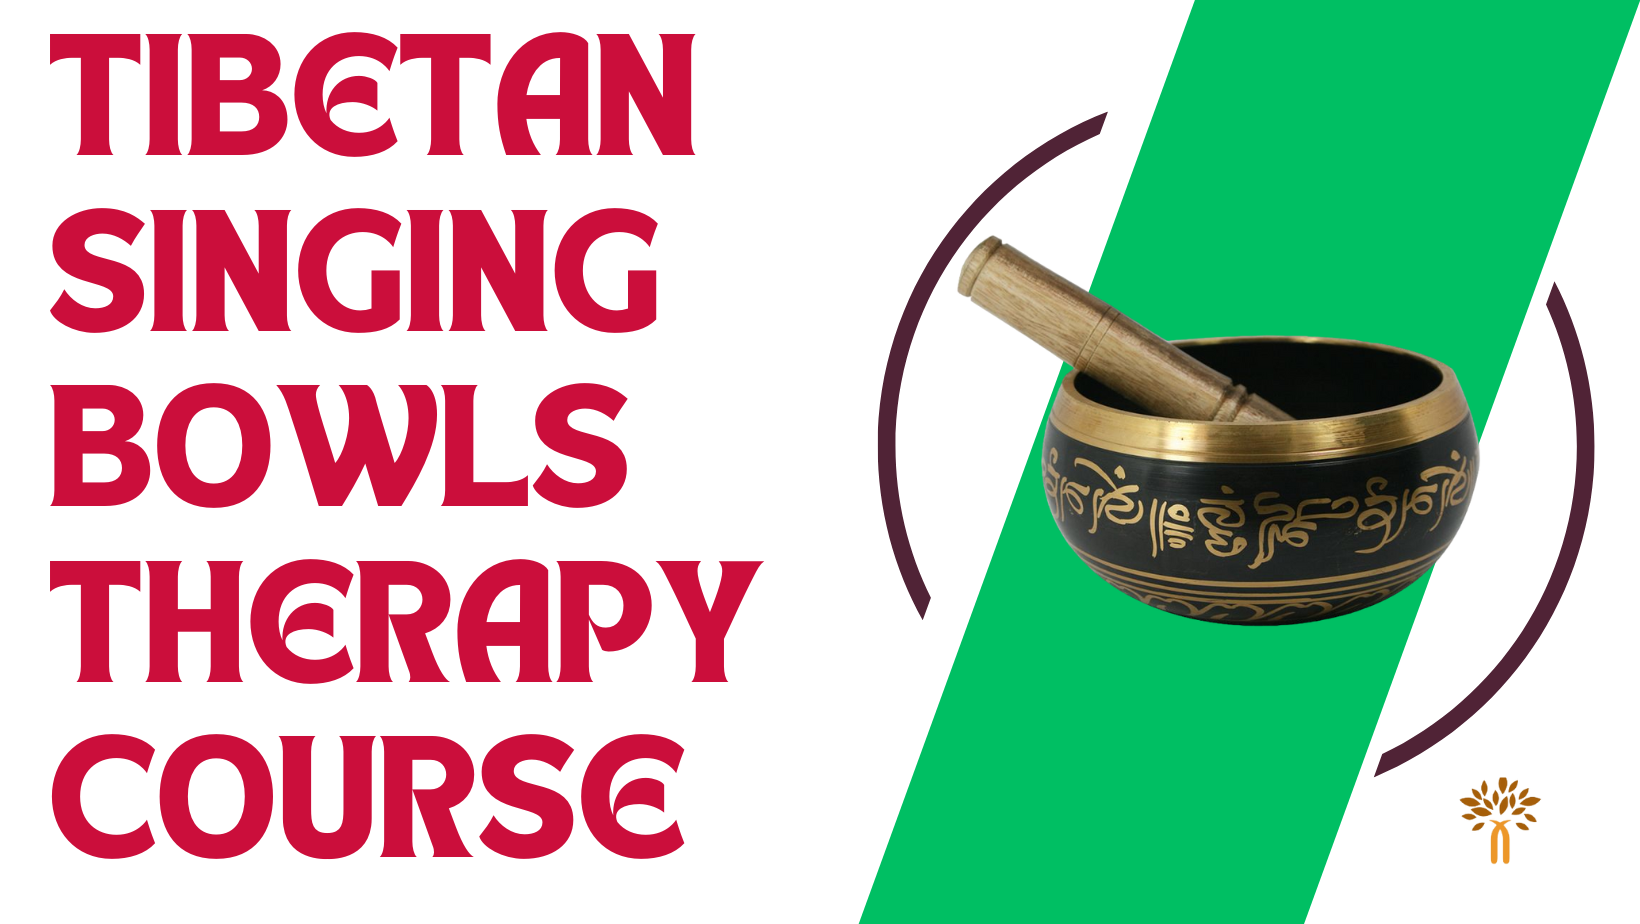 Tibetan Singing Bowls Therapy Courses in Chennai